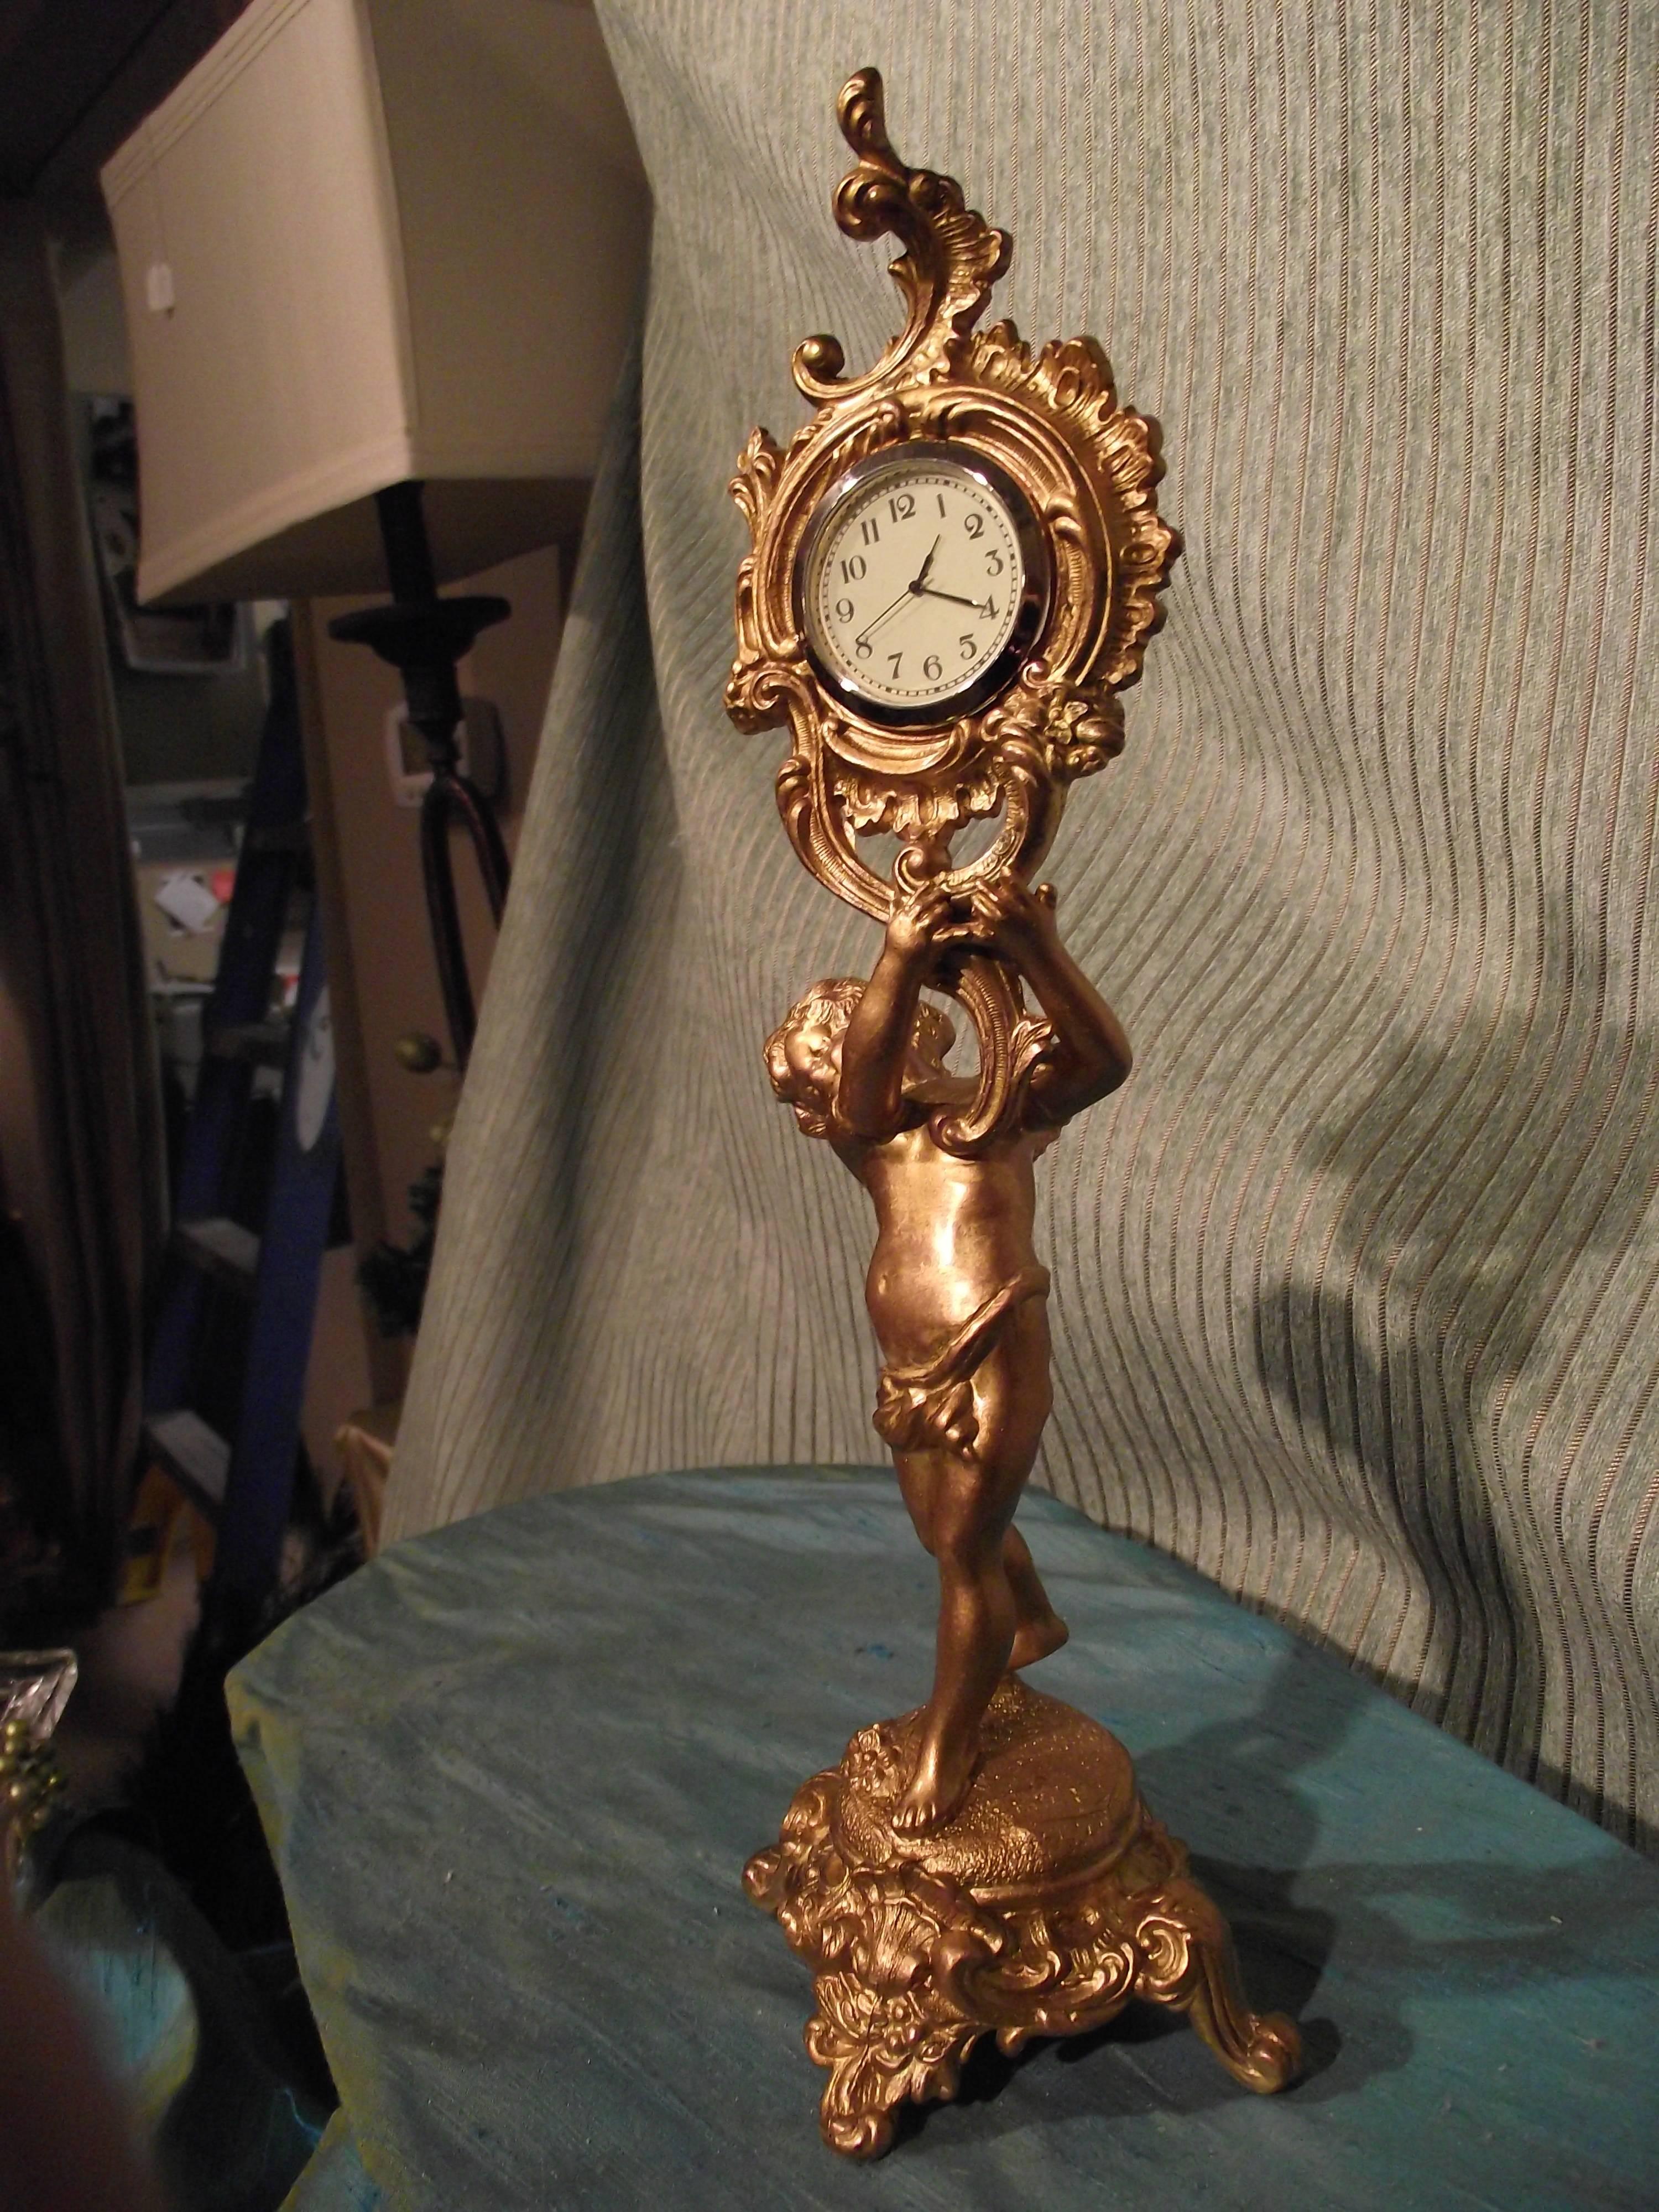 This beautiful little clock is sold as a "decorator piece". Without the original 3 day wind works it has only it does not have antique value. Few people want to wind a clock every three days anyway. This little charmer would be great in a